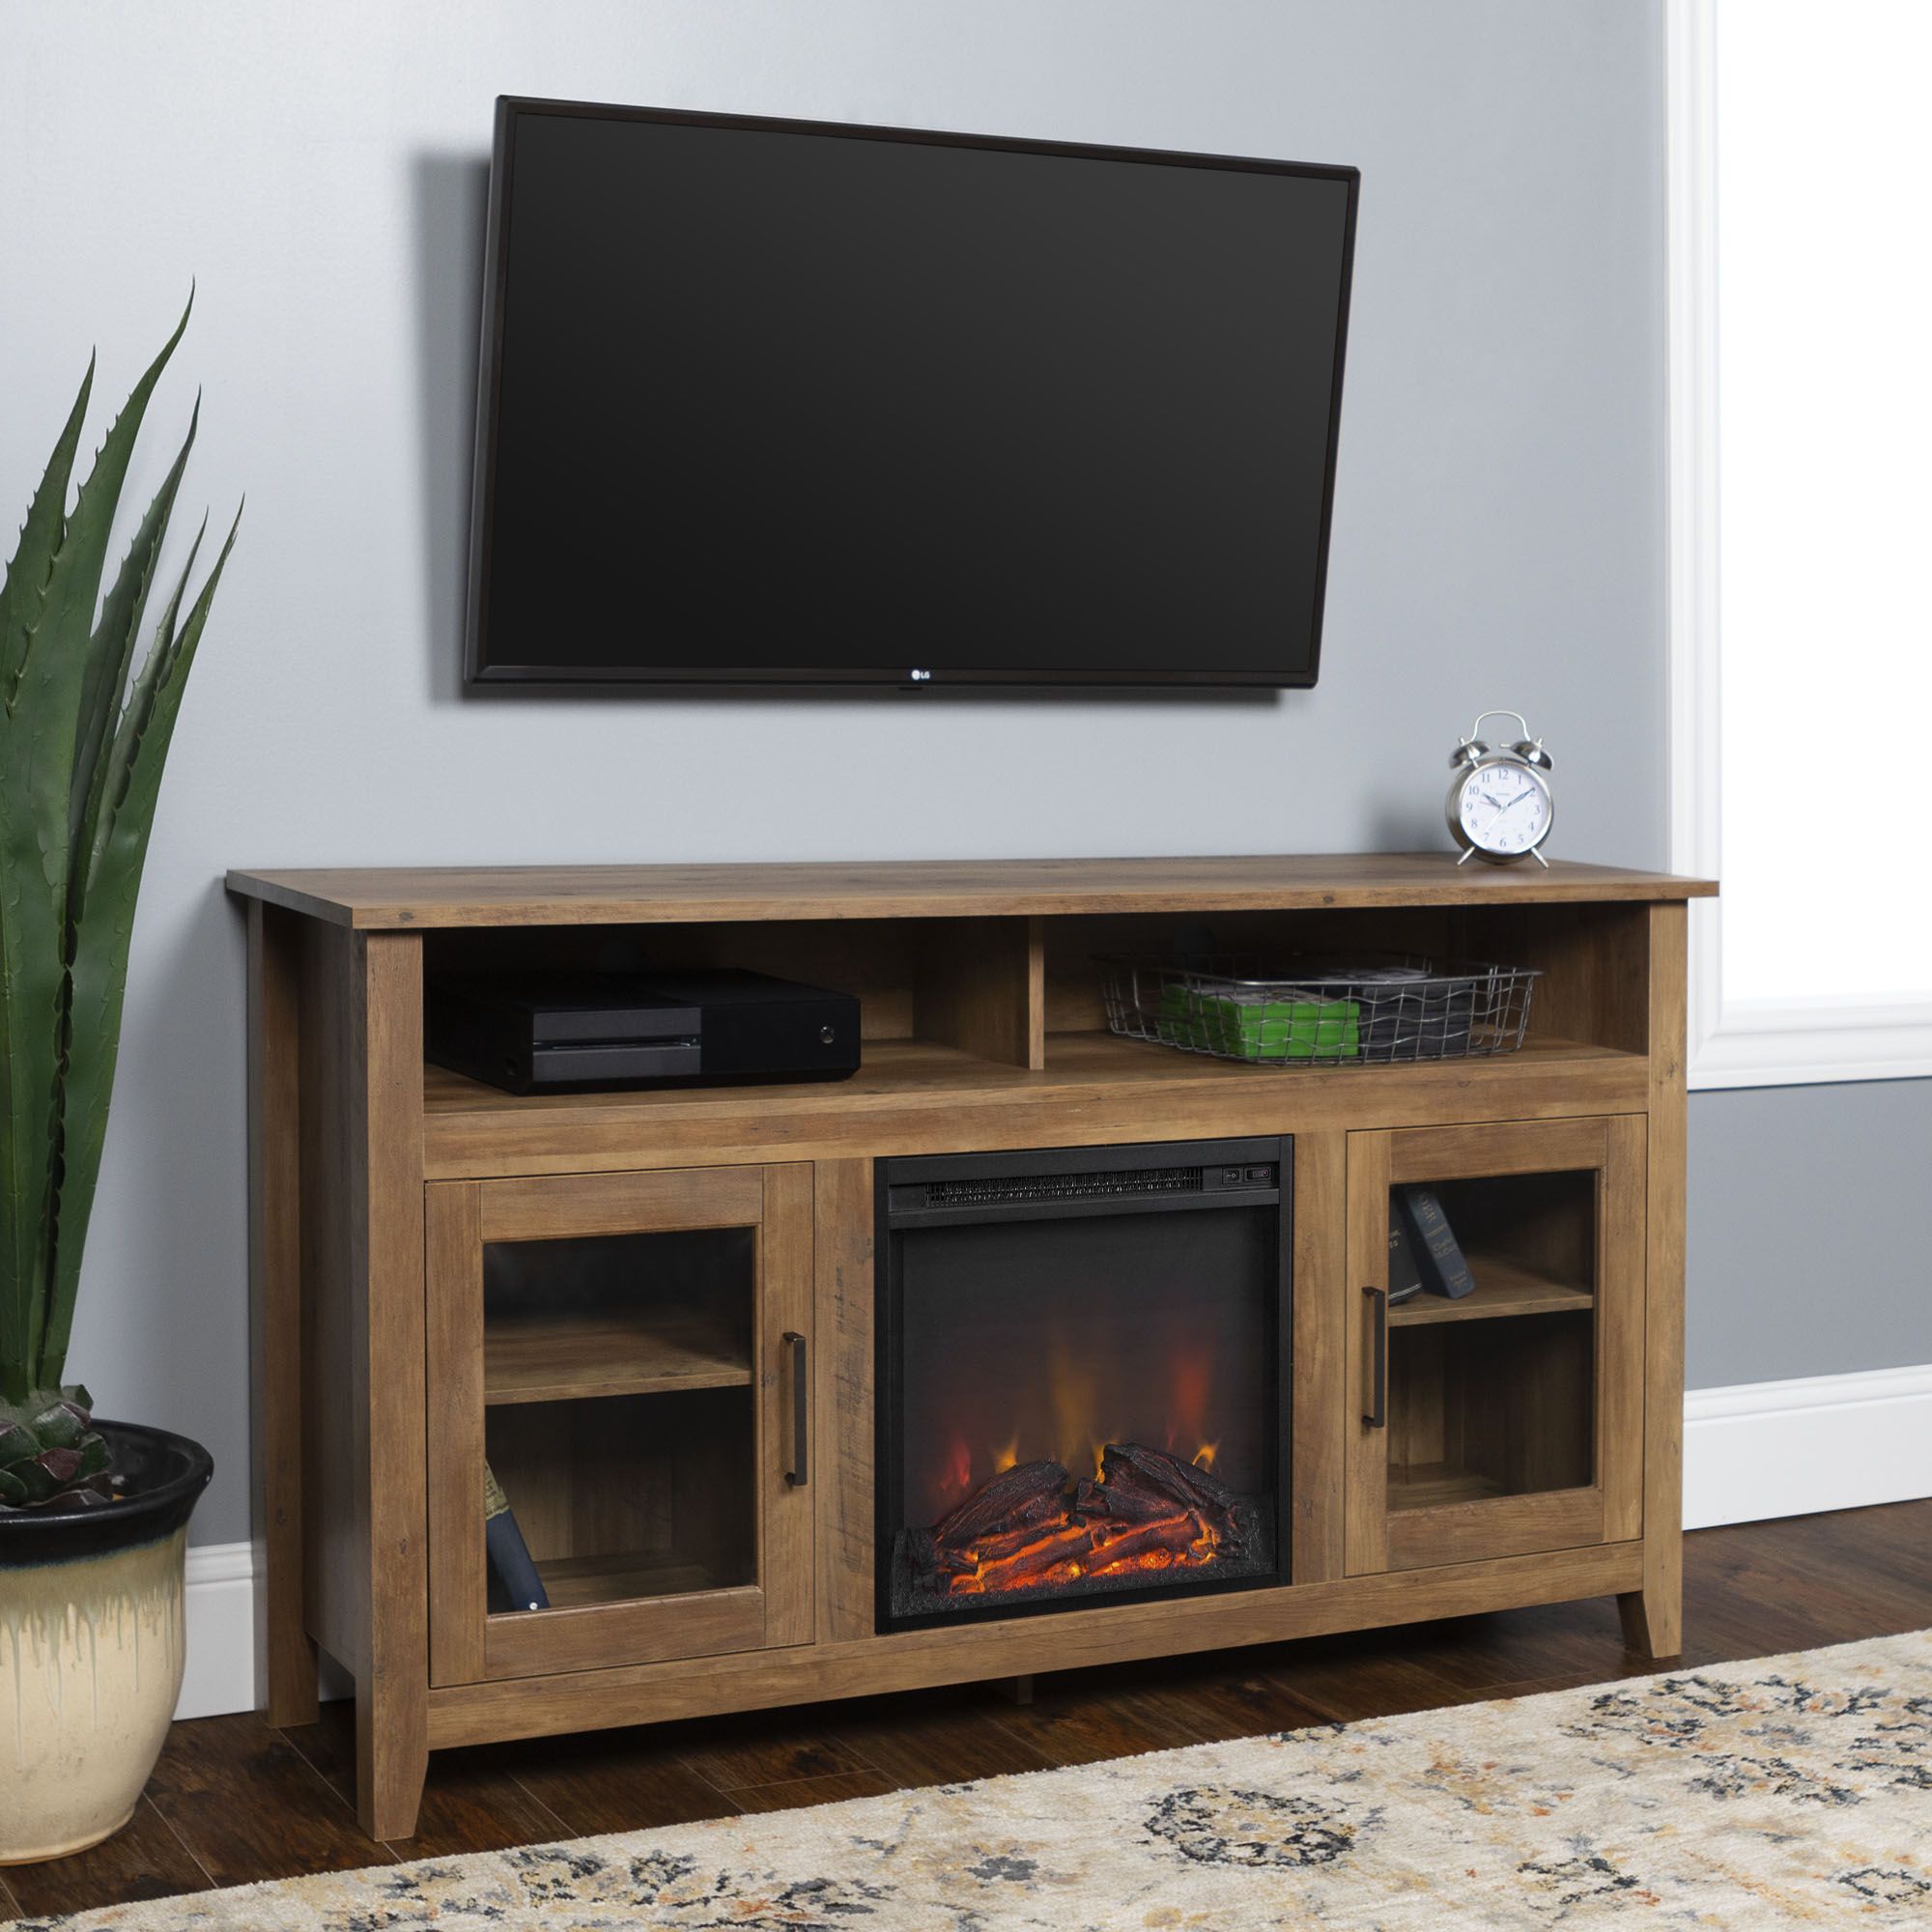 58" Wood Highboy Fireplace Tv Stand – Rustic Oak 842158125507 | Ebay Inside Wood Highboy Fireplace Tv Stands (Gallery 10 of 20)